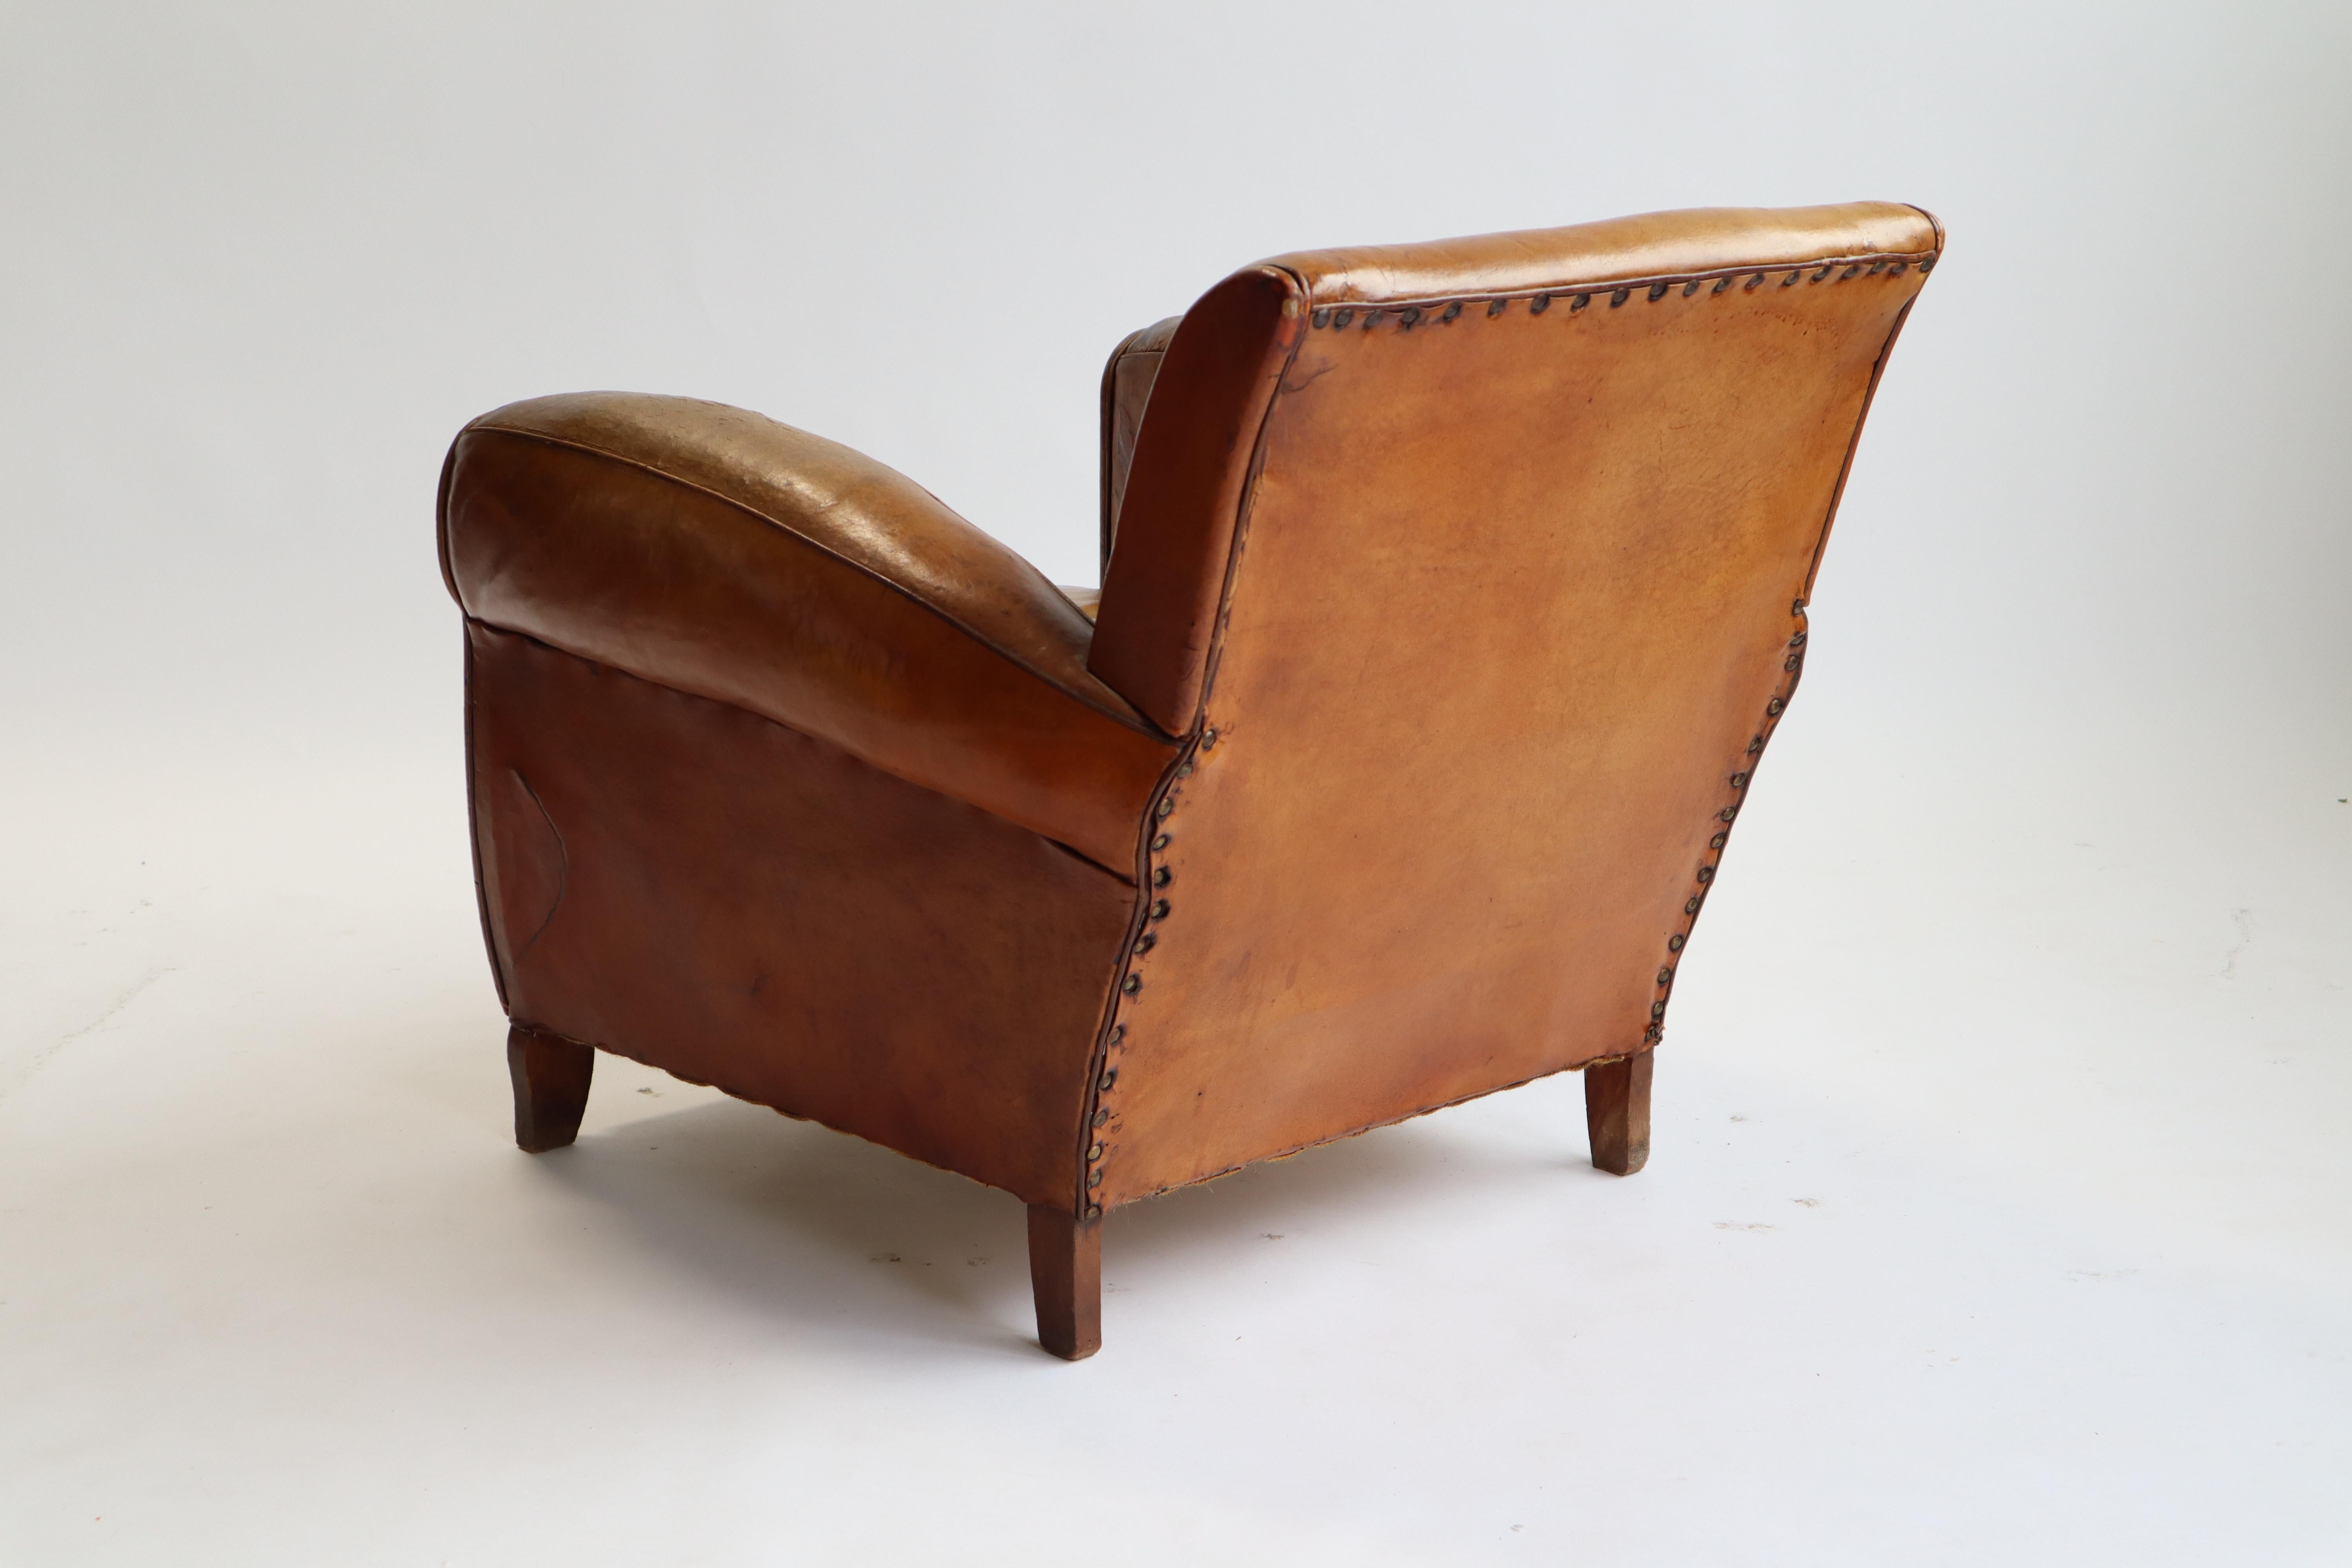 Art Deco club chair in original leather, France 1940s. Nice patina throughout.